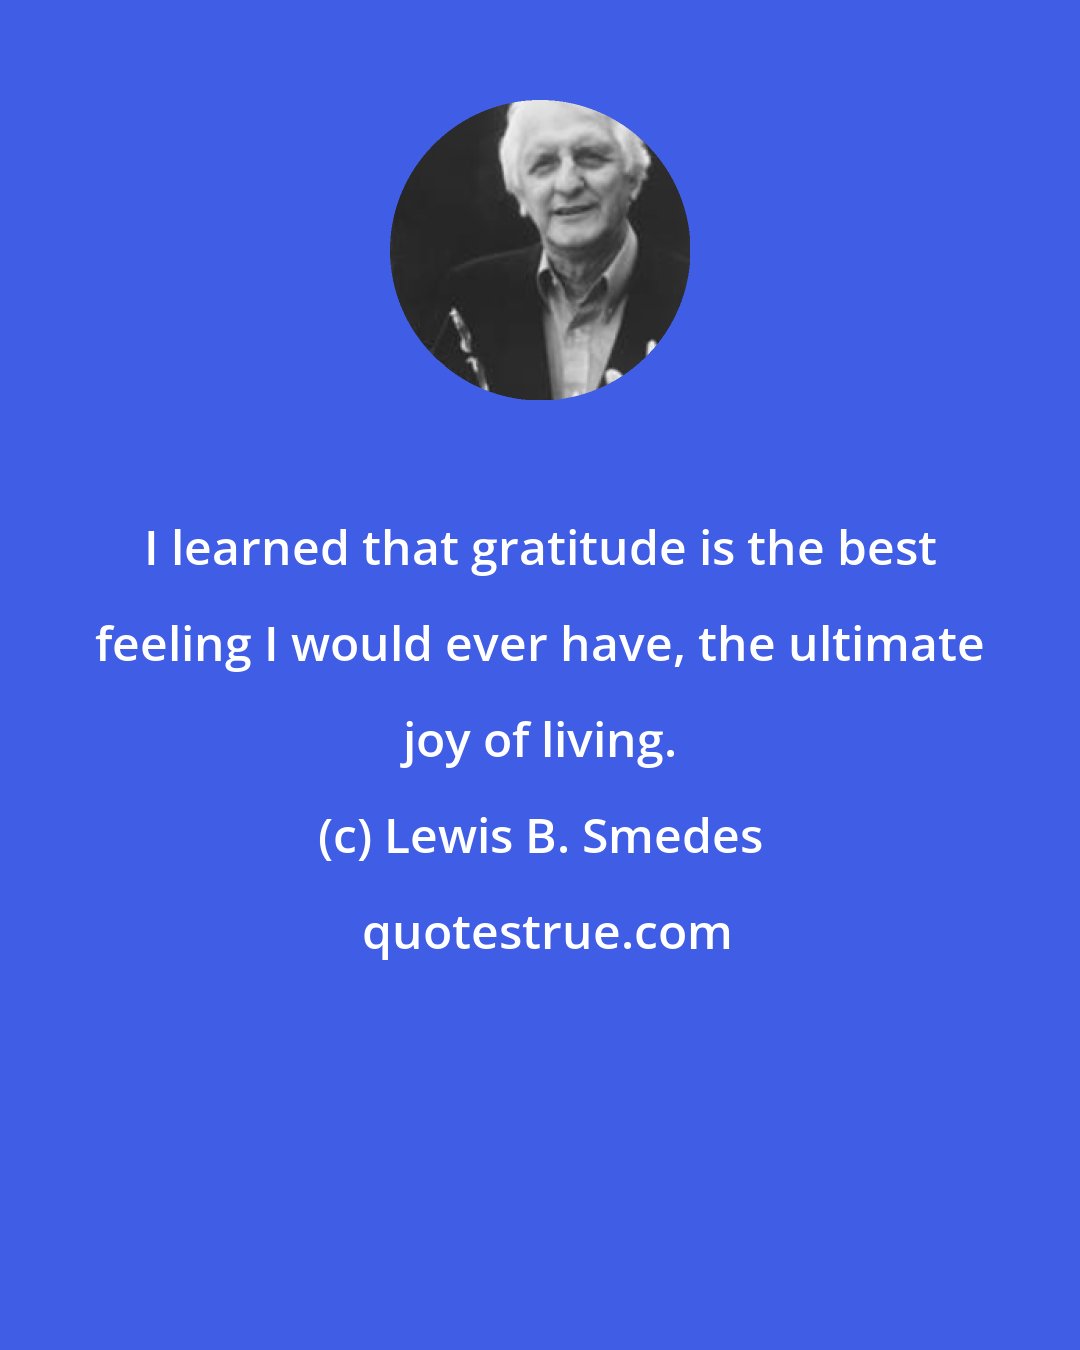 Lewis B. Smedes: I learned that gratitude is the best feeling I would ever have, the ultimate joy of living.